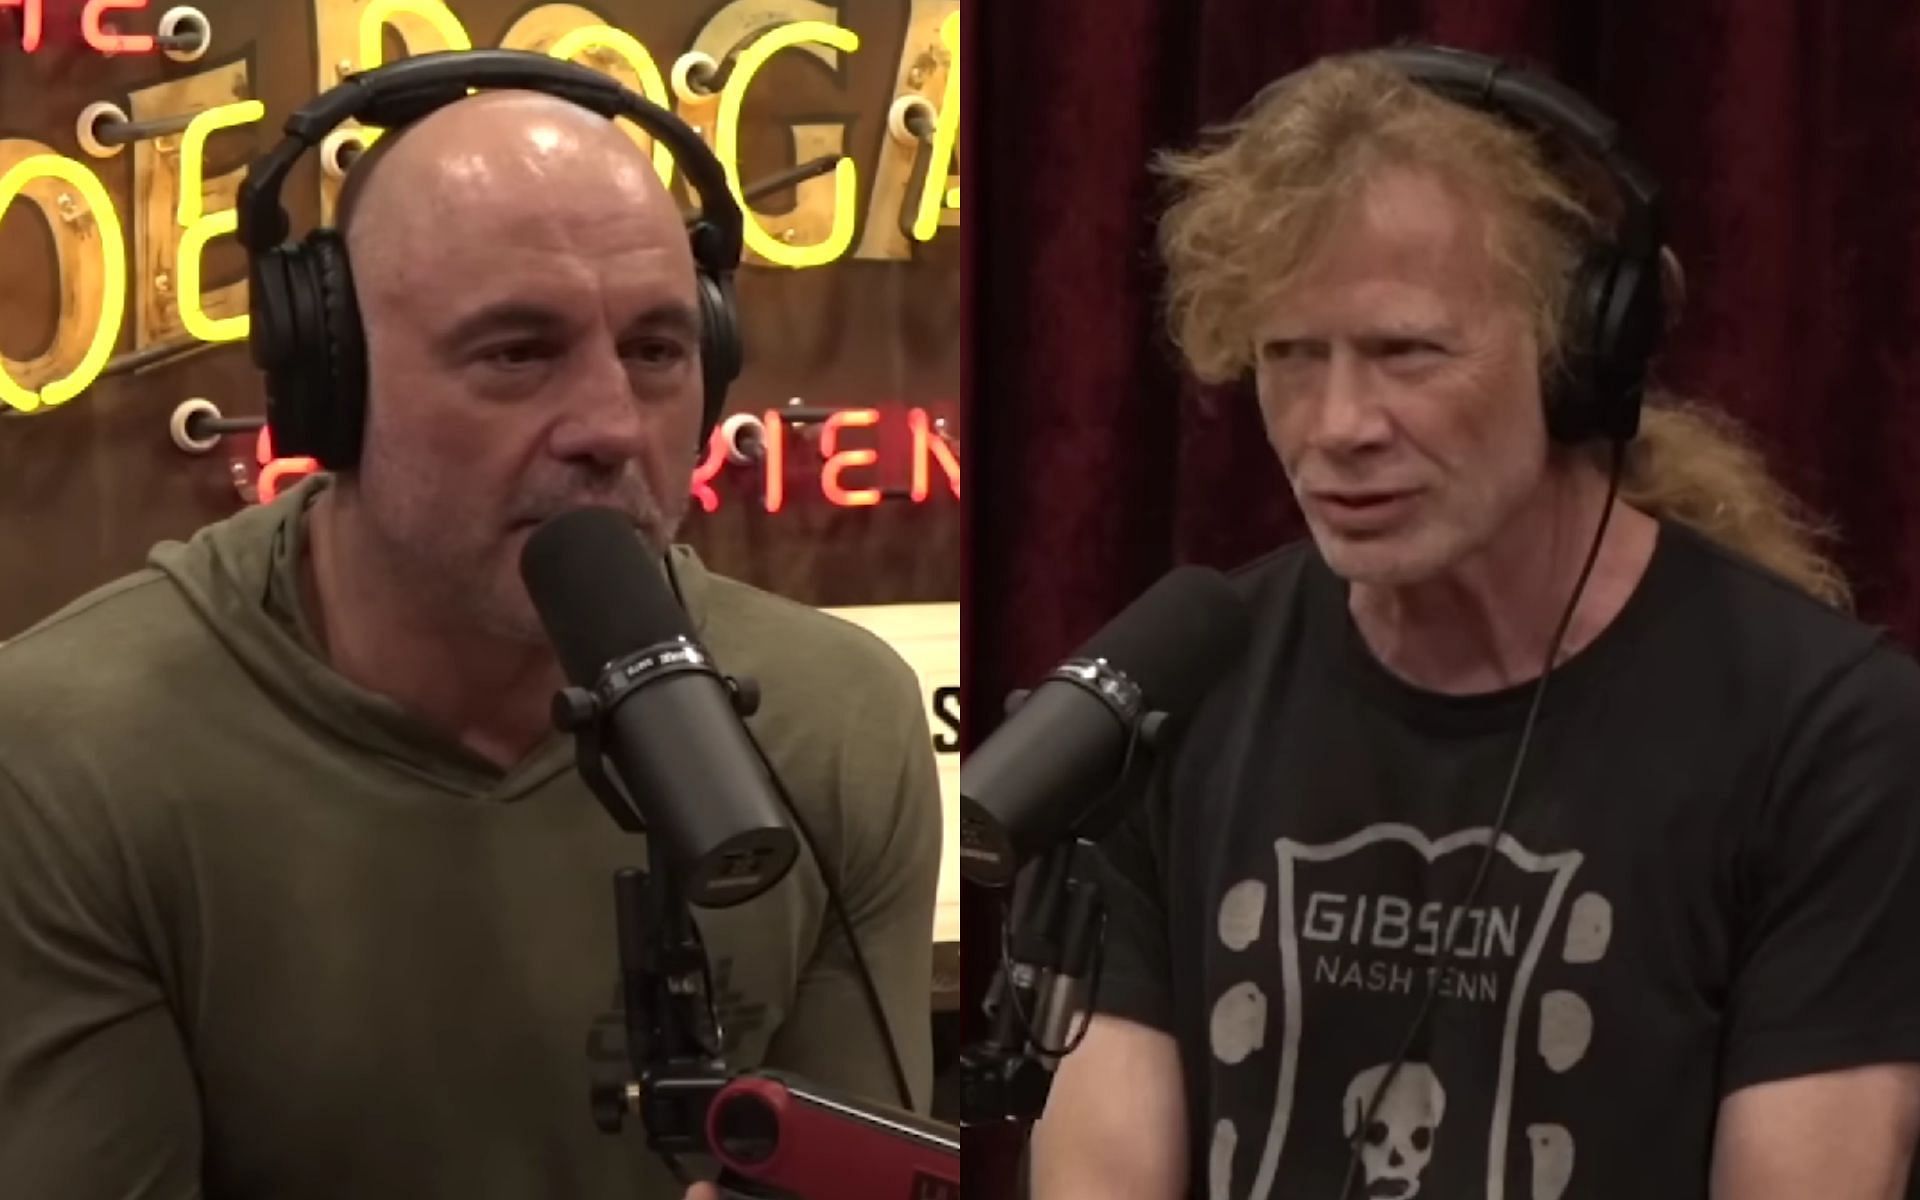 Joe Rogan (left), Dave Mustaine (right) [Images courtesy of PowerfulJRE on YouTube]